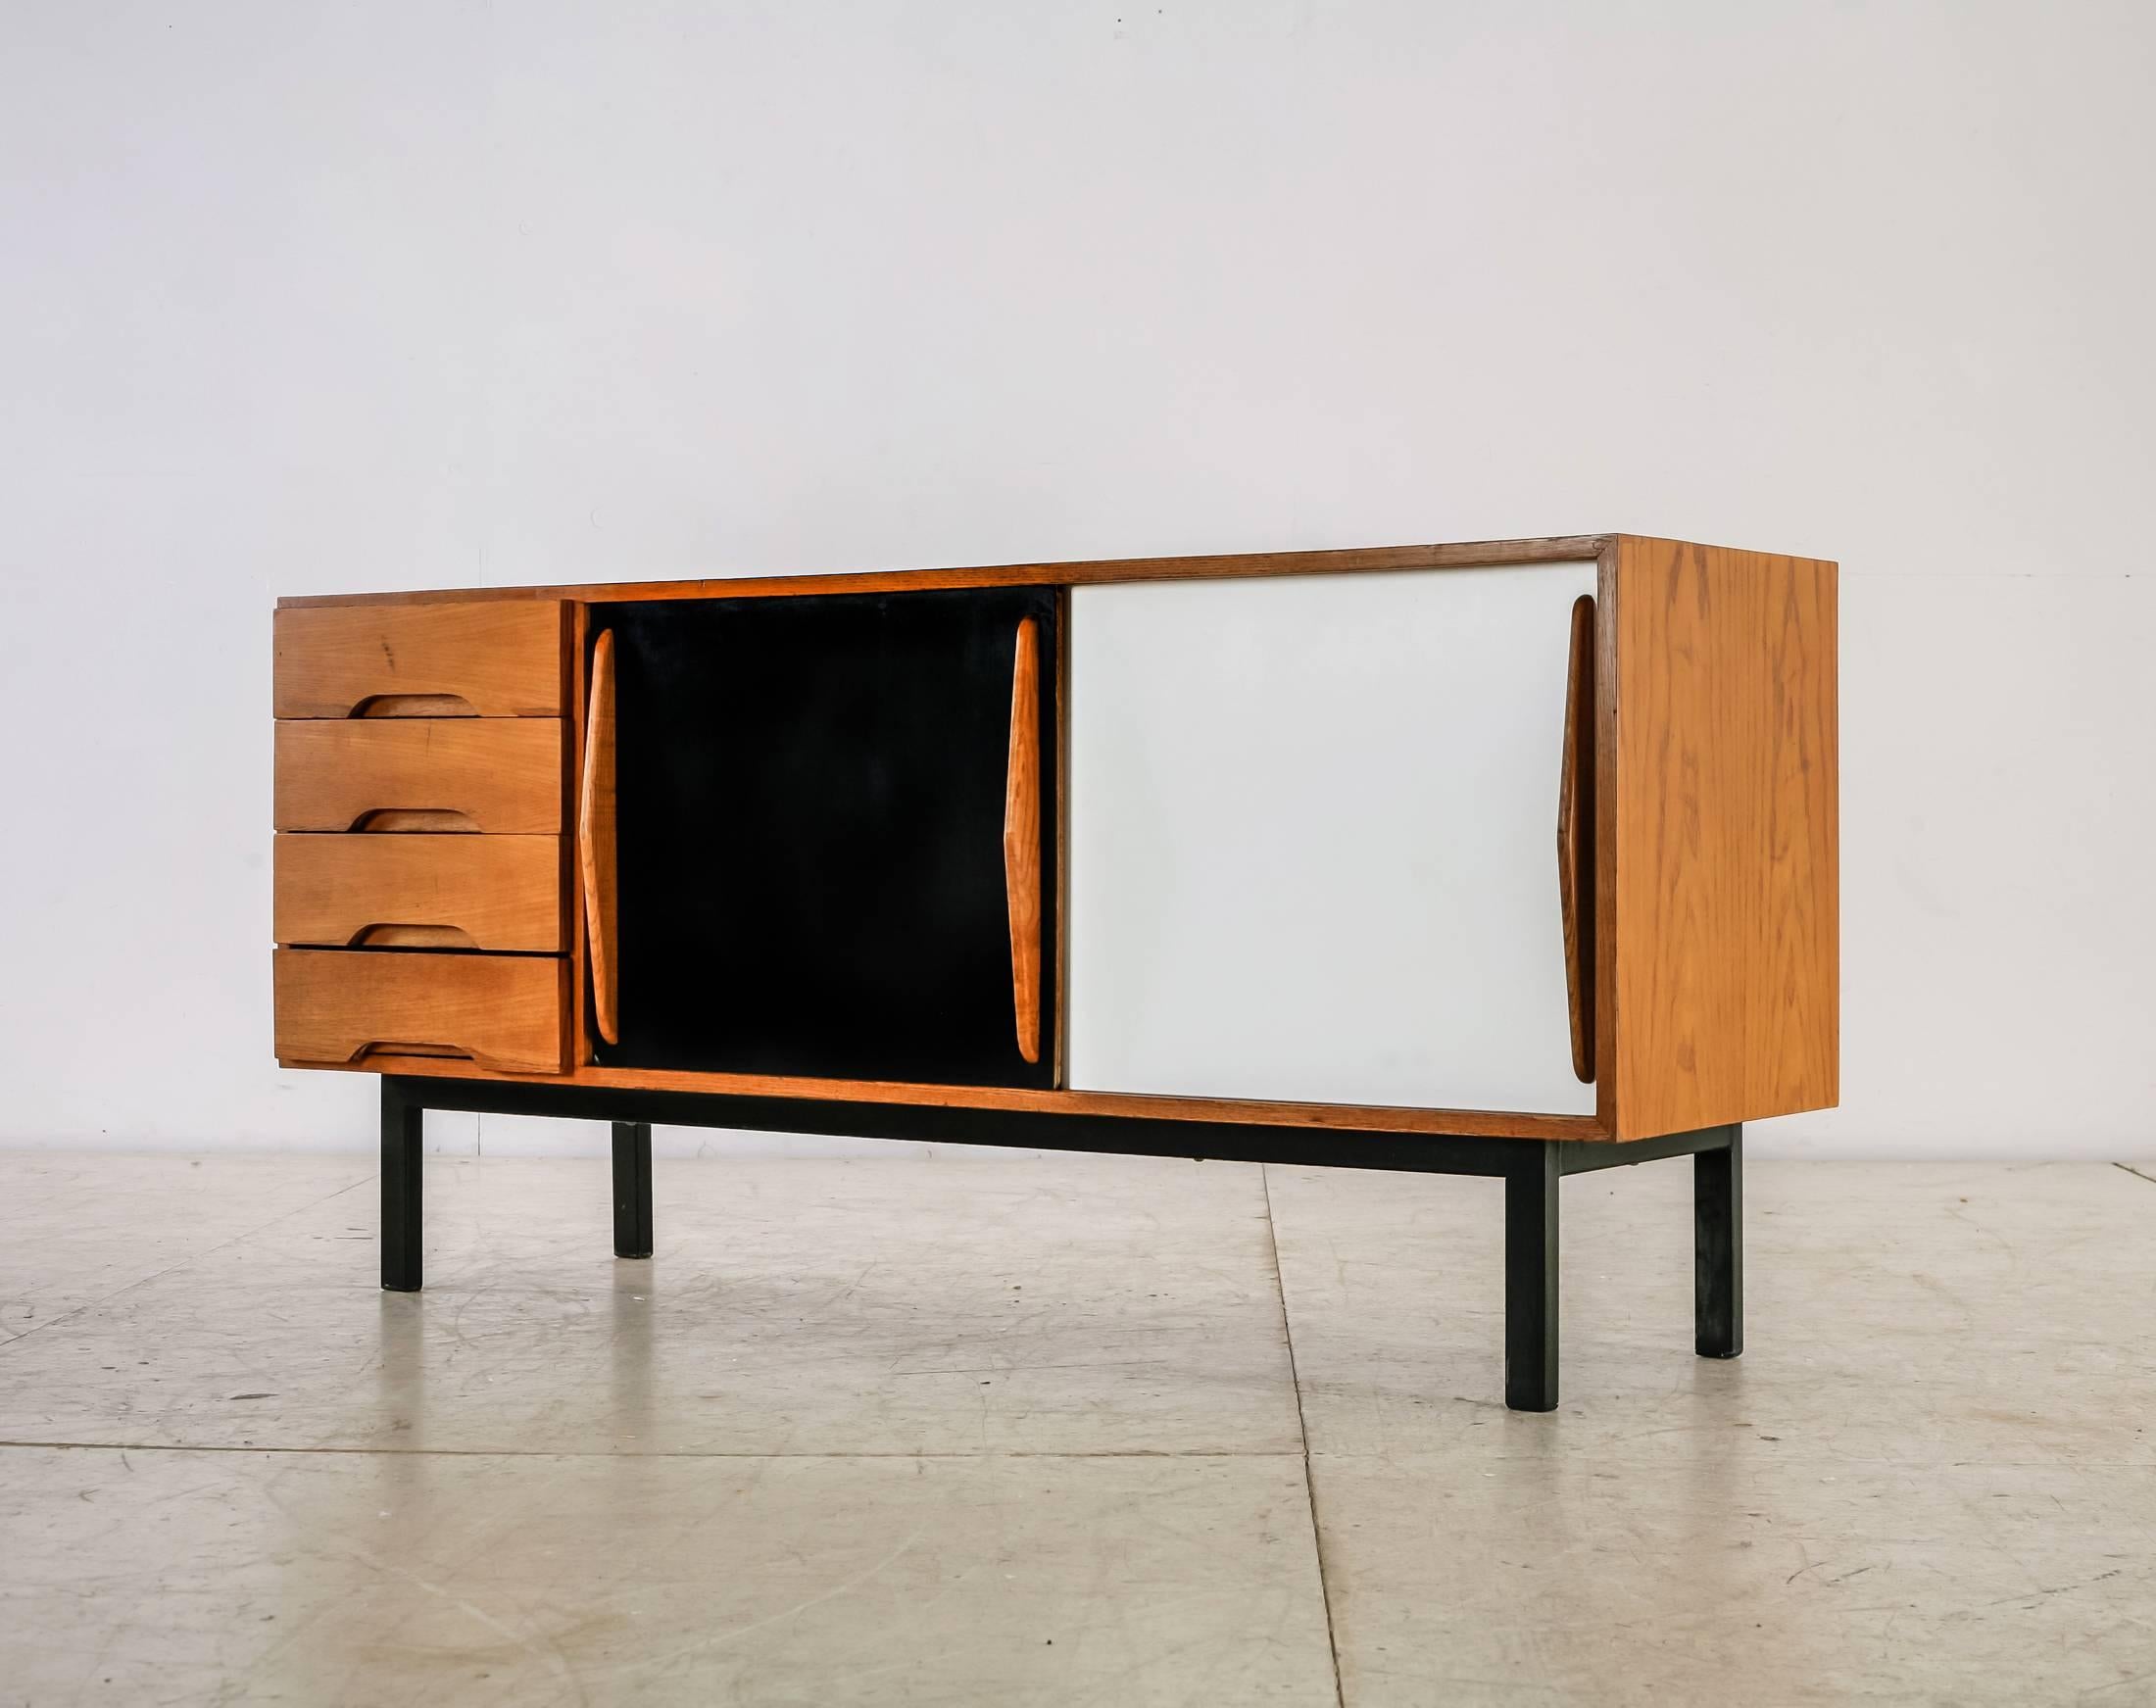 A Charlotte Perriand sideboard, made of ash with a black and a white formica sliding door. It has four drawers and stands on a black lacquered metal frame.
The sideboard was designed in 1958 for the Cansado new town in Mauritania and produced by